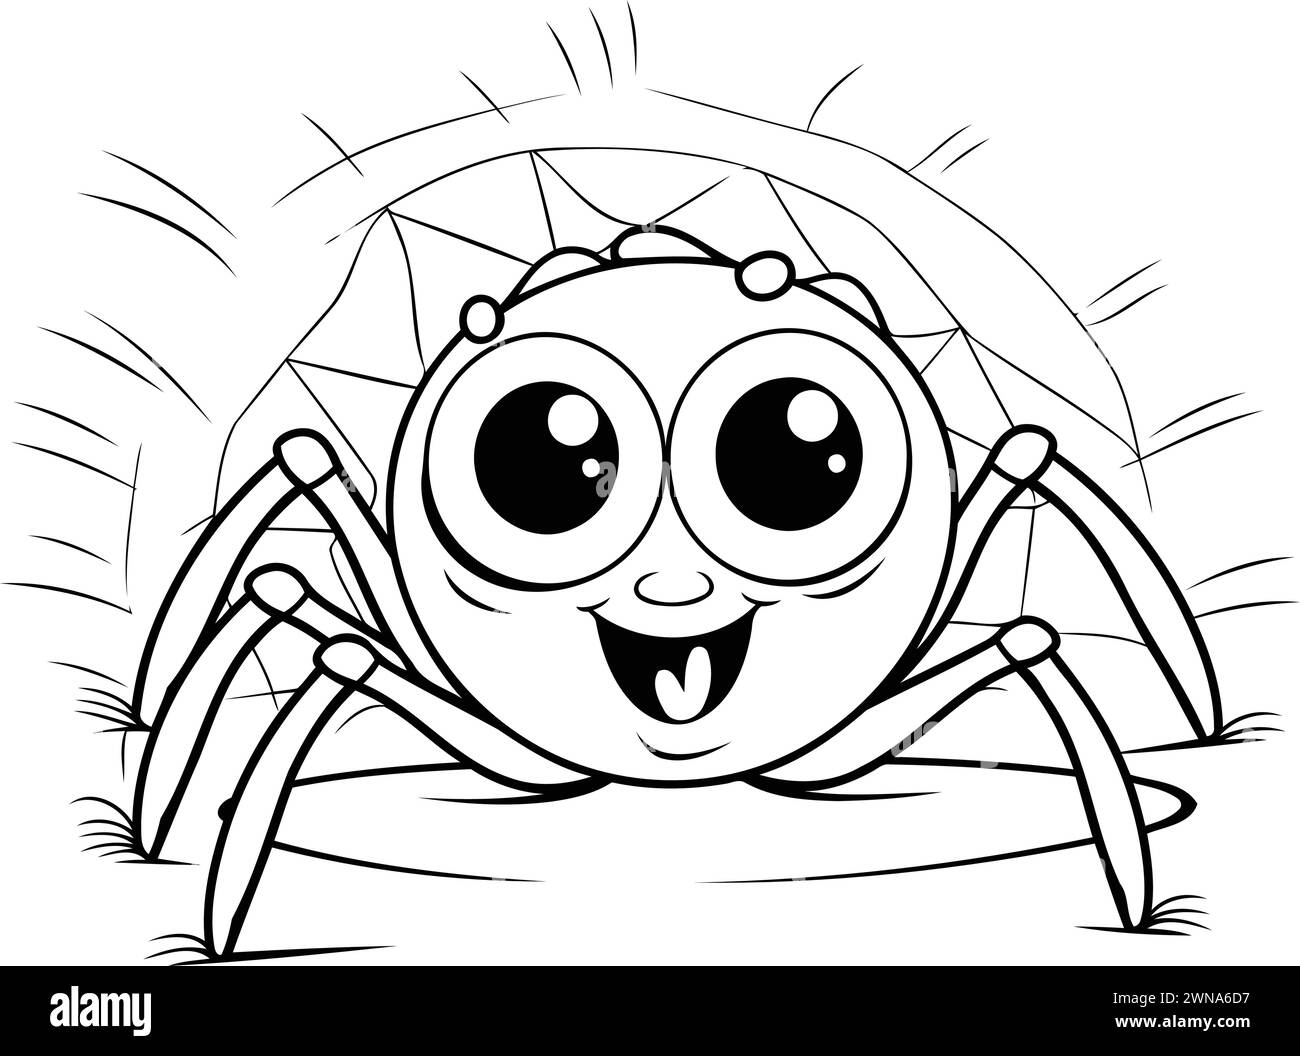 Cartoon spider with big eyes. Black and white vector illustration. Stock Vector